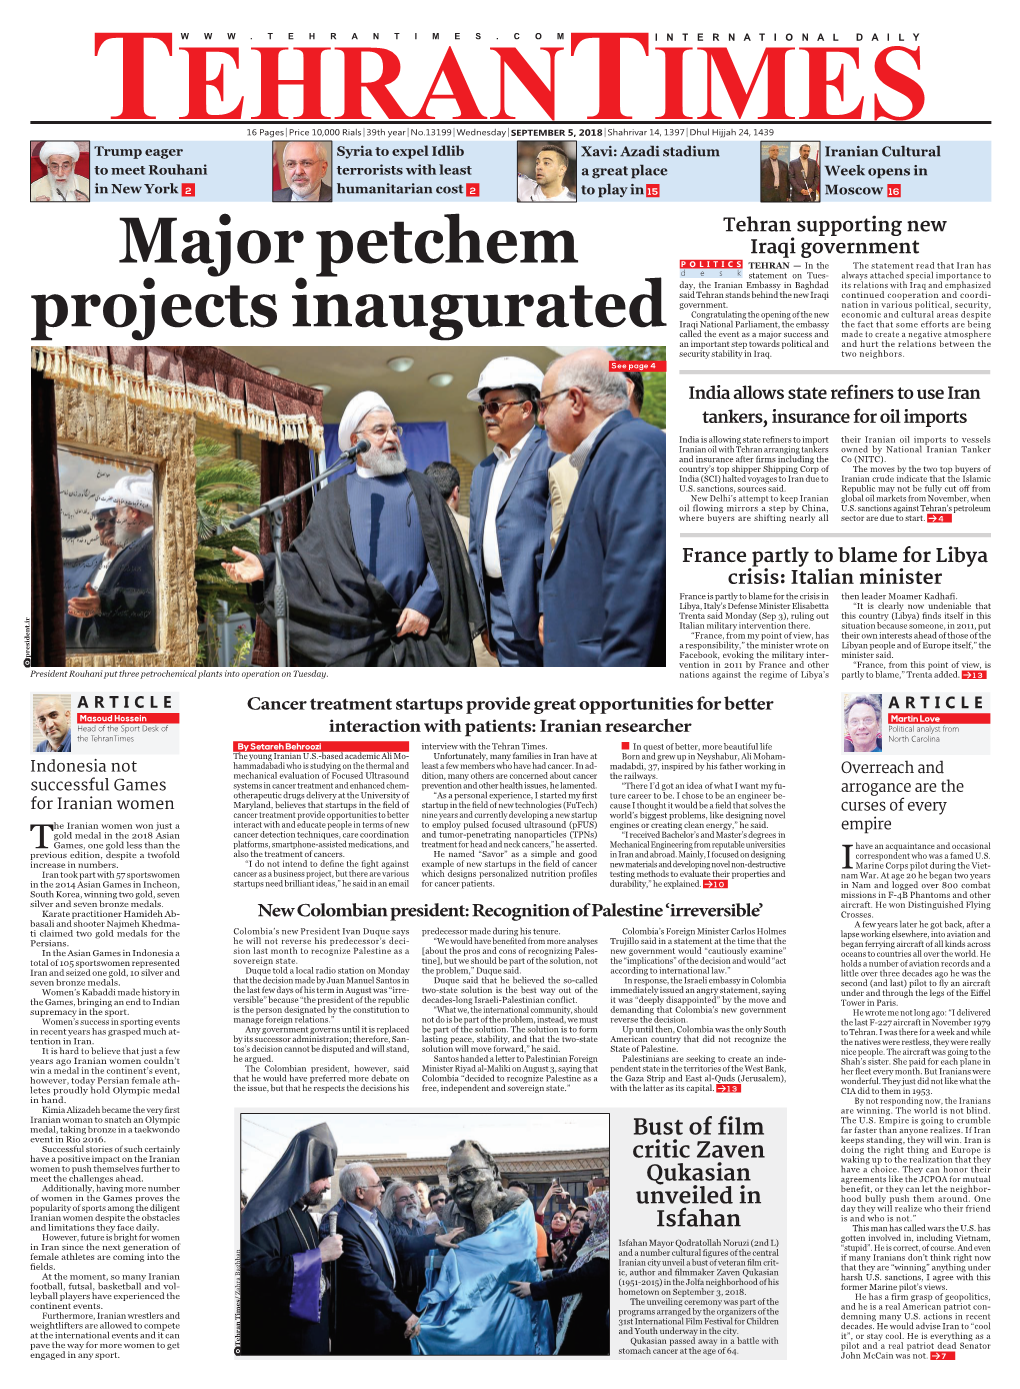 Major Petchem Projects Inaugurated